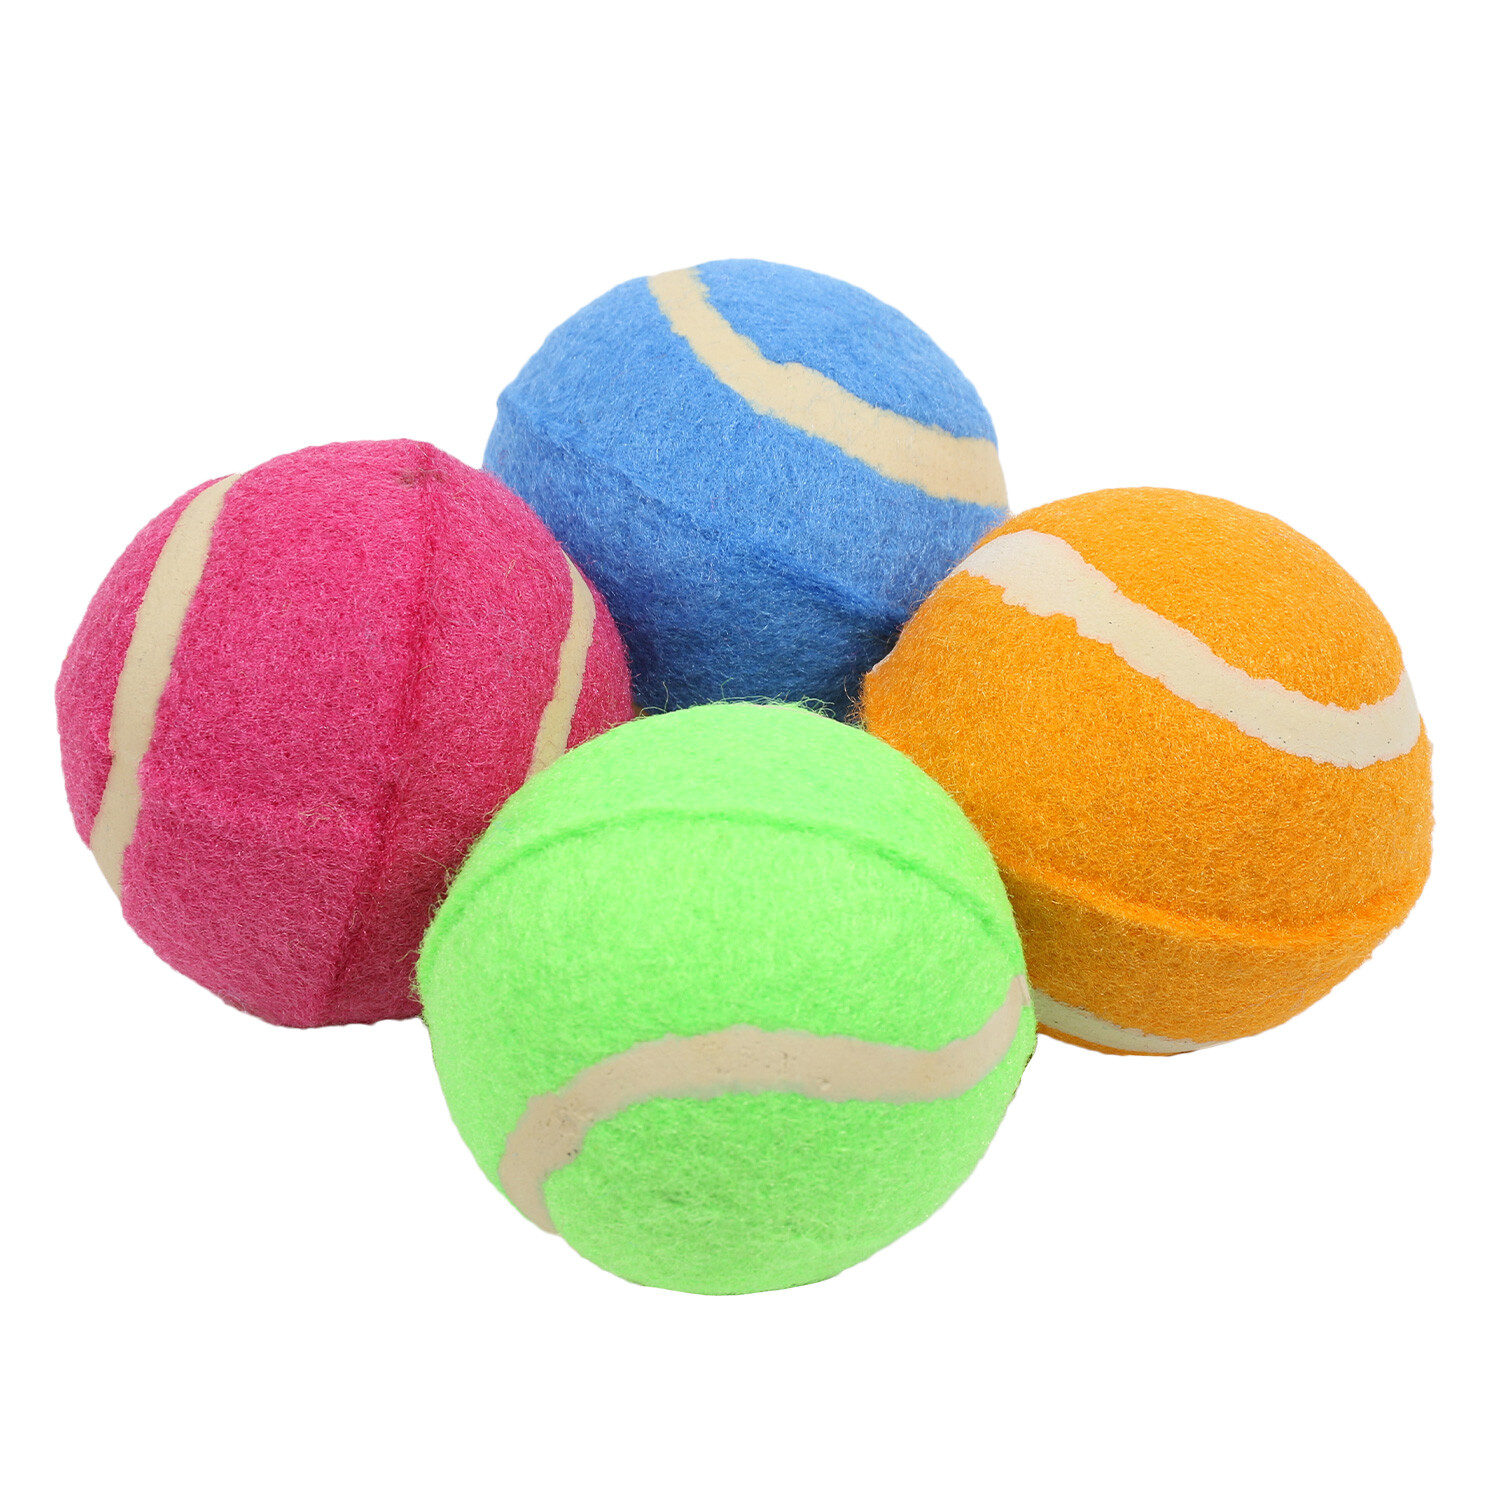 Tennis Ball Dog Toy 4 Pack Image 2